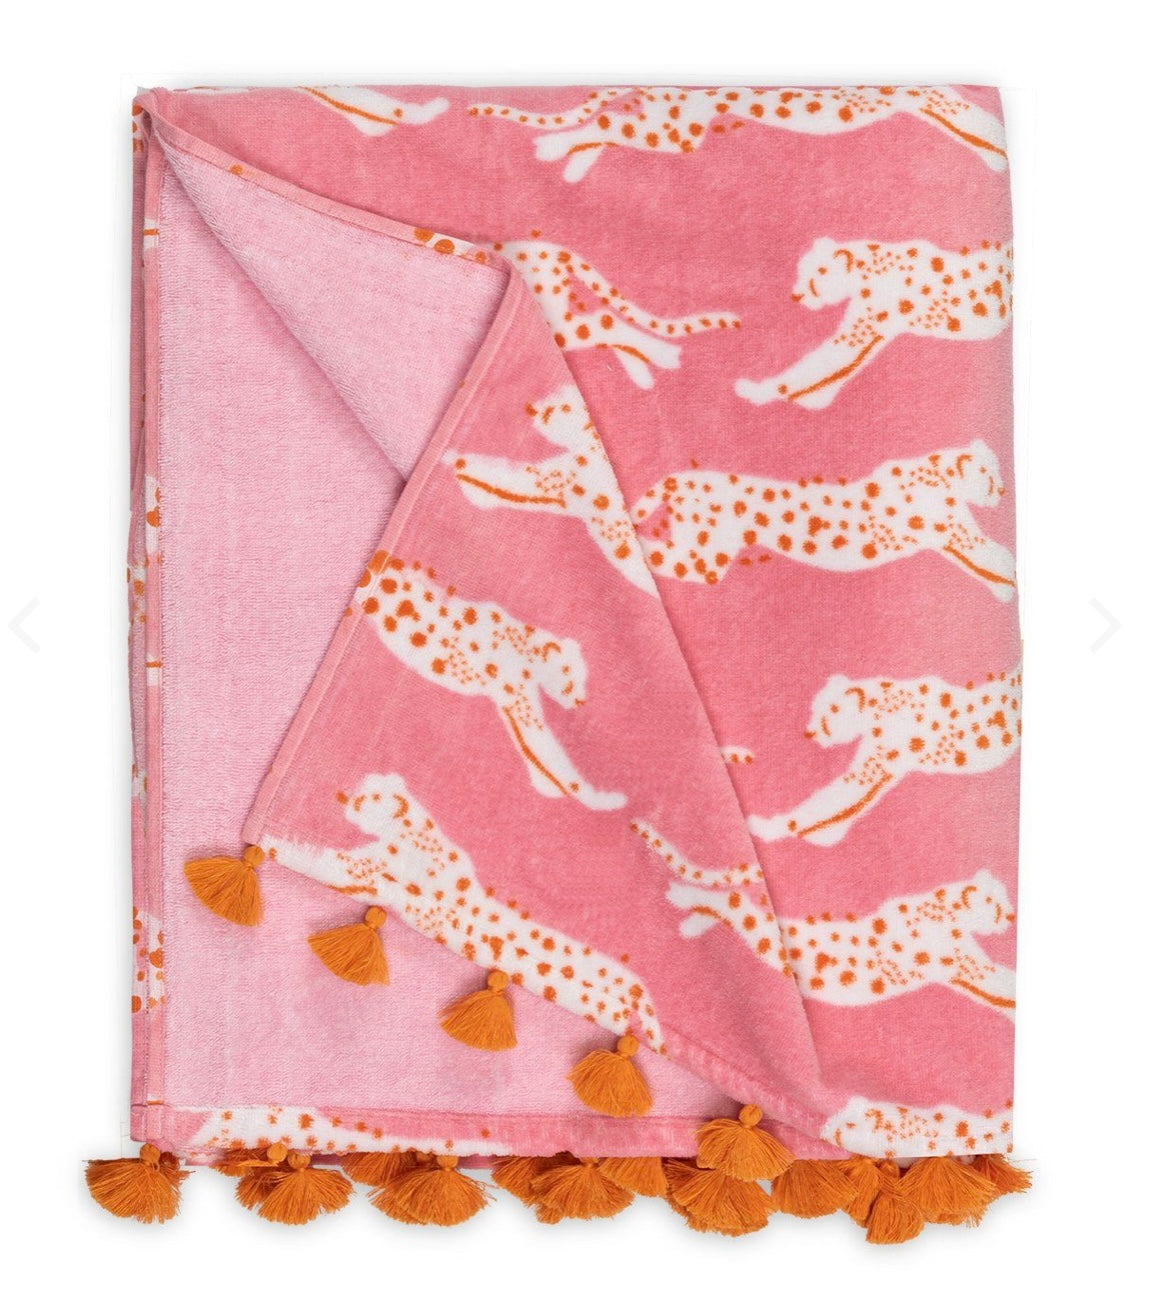 Leaping Leopard Beach Towel ~ Pink Sugar or Surf